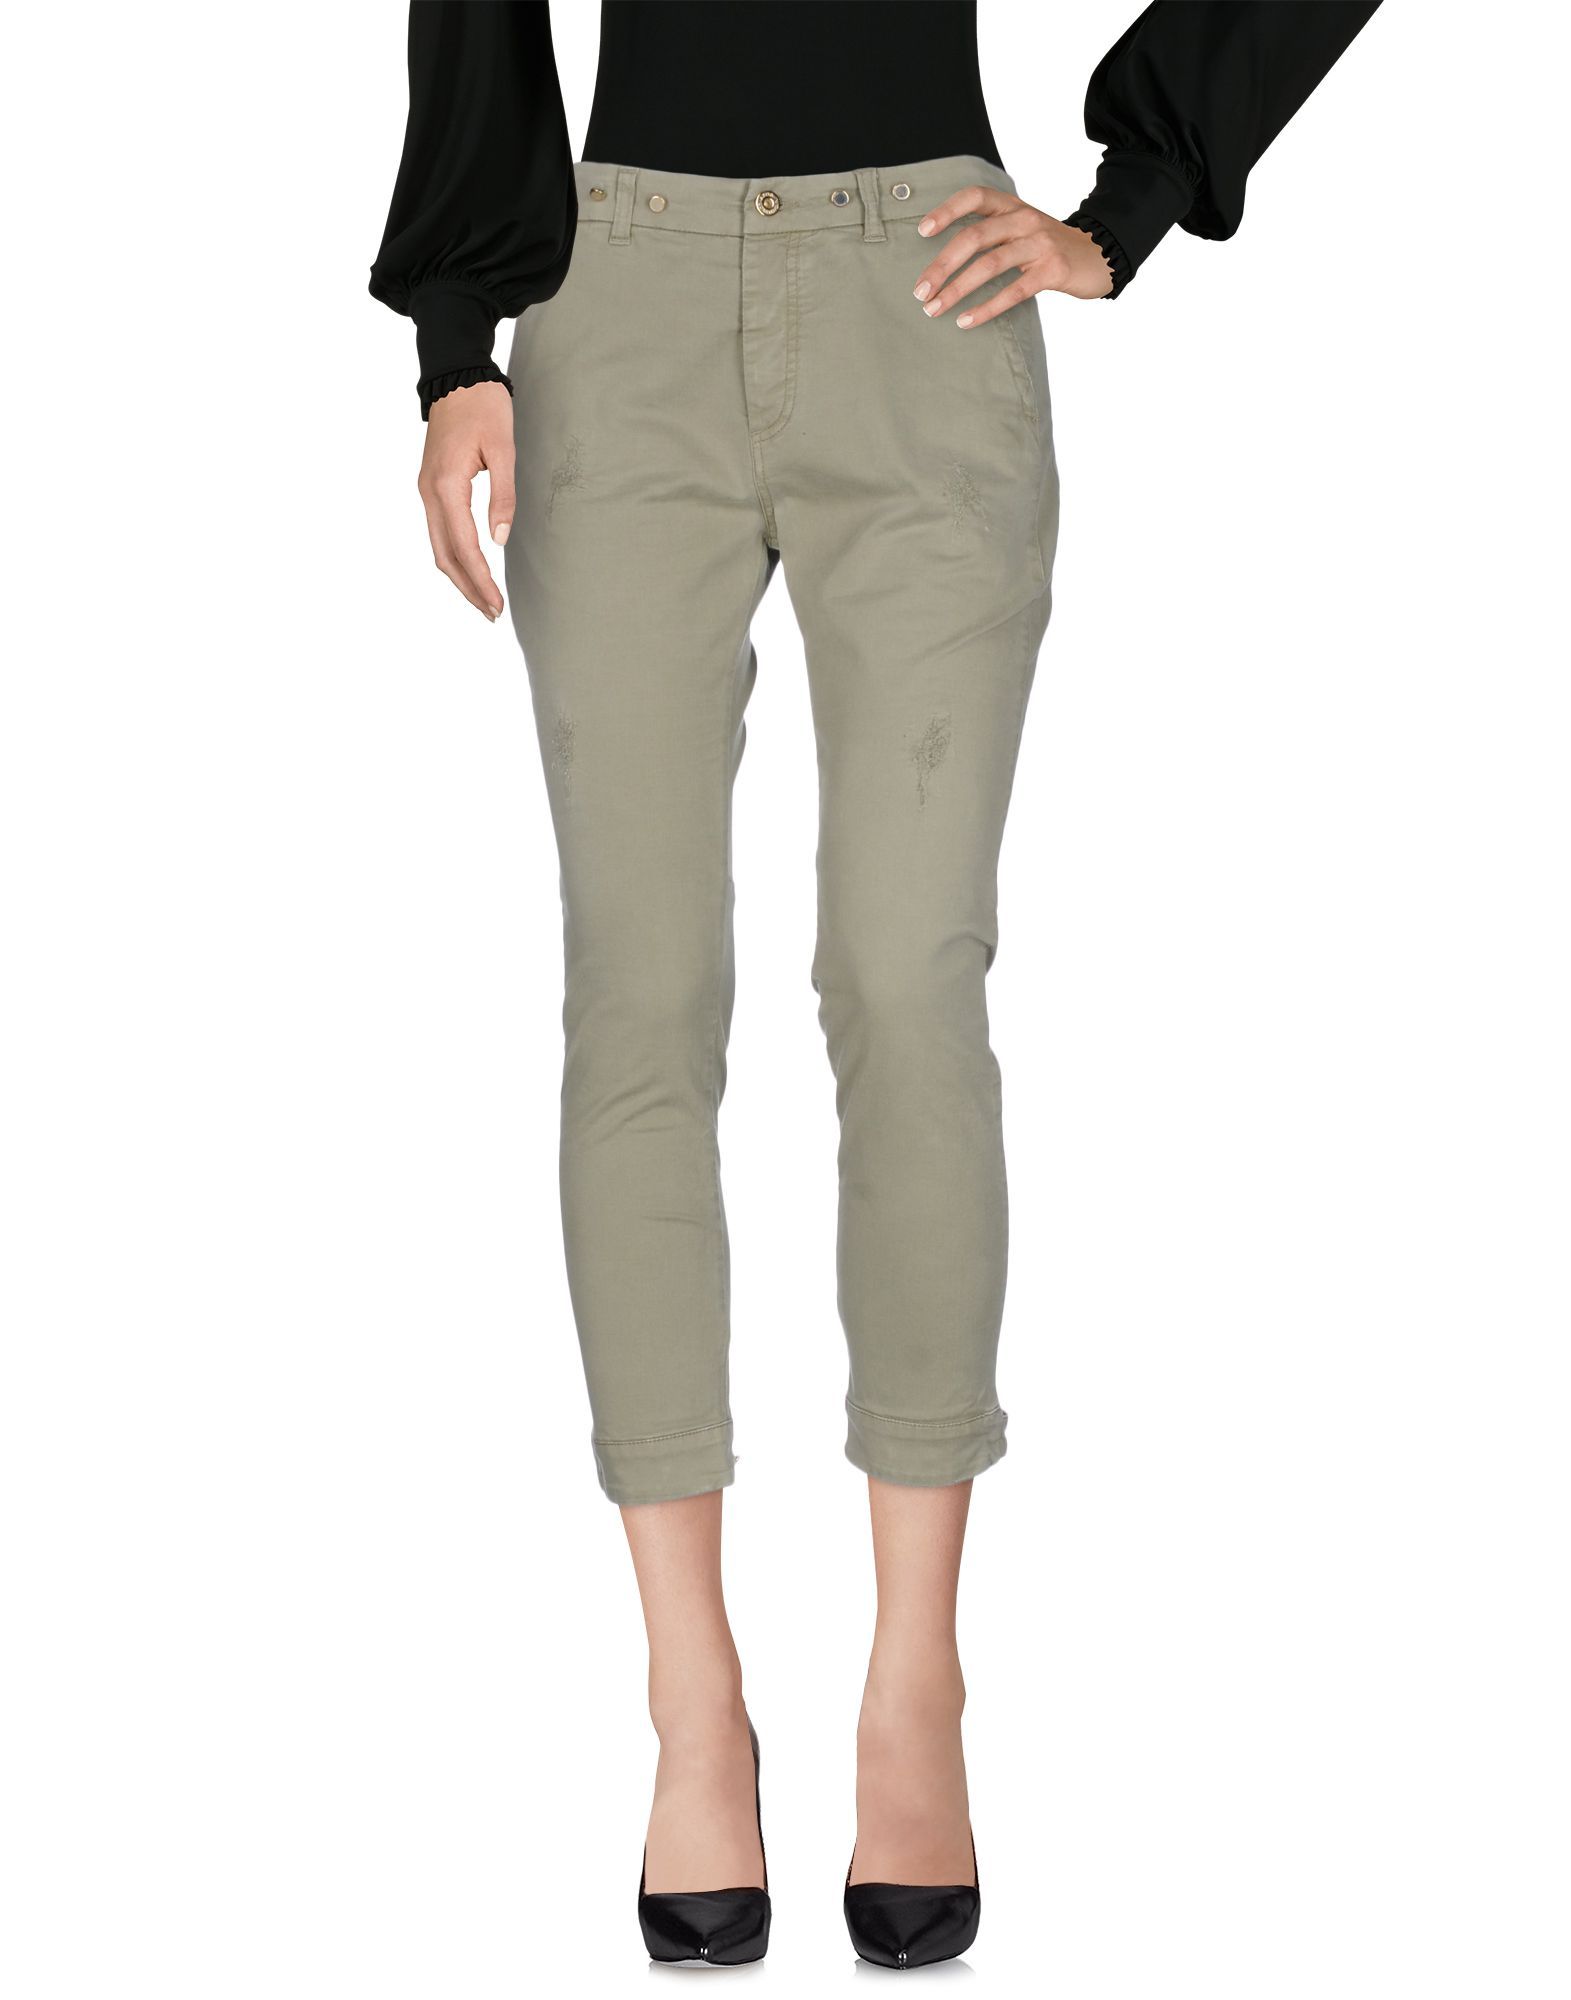 gabardine, worn effect, logo, solid colour, mid rise, comfort fit, tapered leg, button closing, multipockets, button closing hemline, stretch, chinos